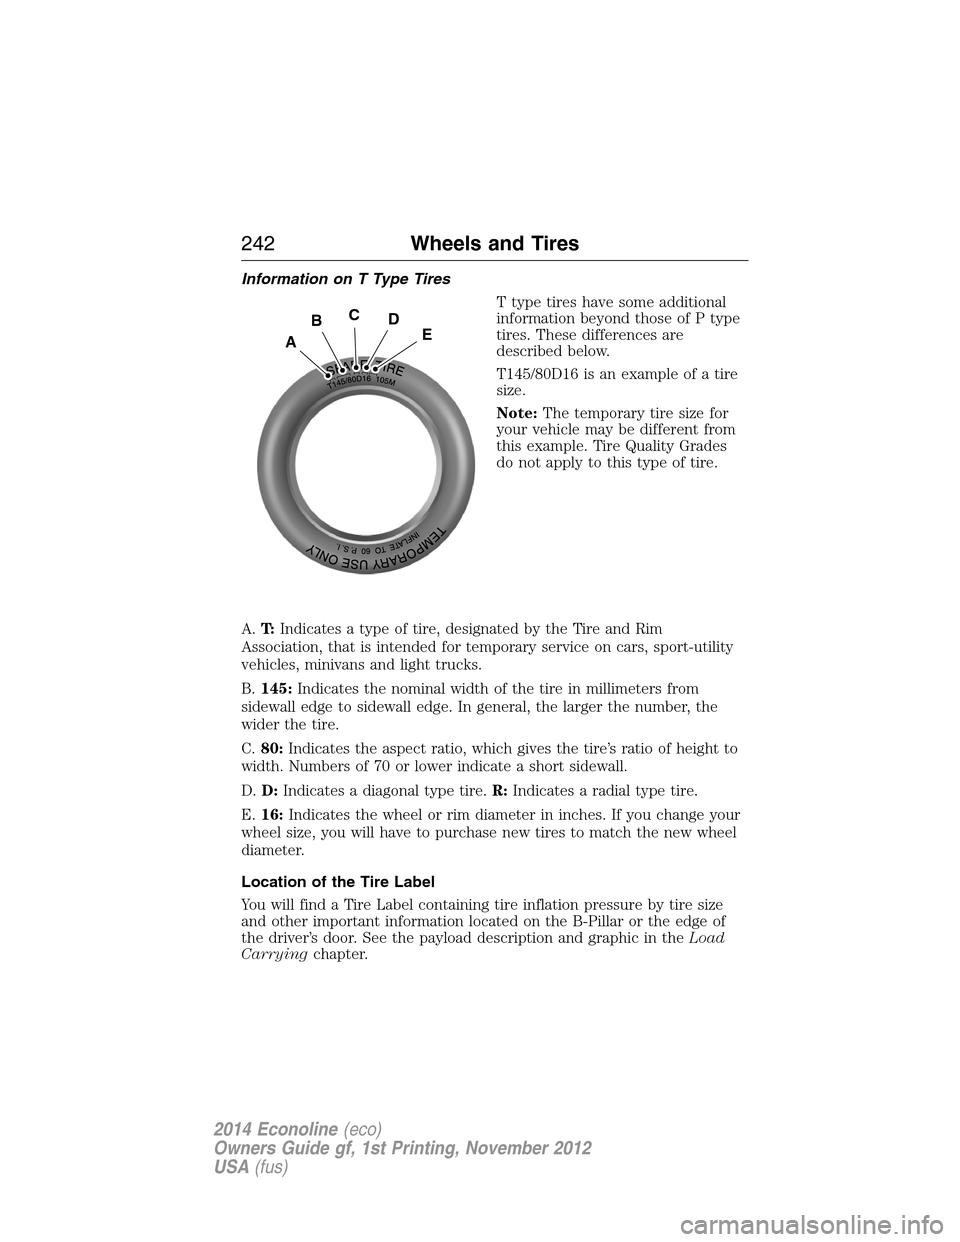 FORD E SERIES 2014 4.G Owners Manual Information on T Type Tires
T type tires have some additional
information beyond those of P type
tires. These differences are
described below.
T145/80D16 is an example of a tire
size.
Note:The tempora